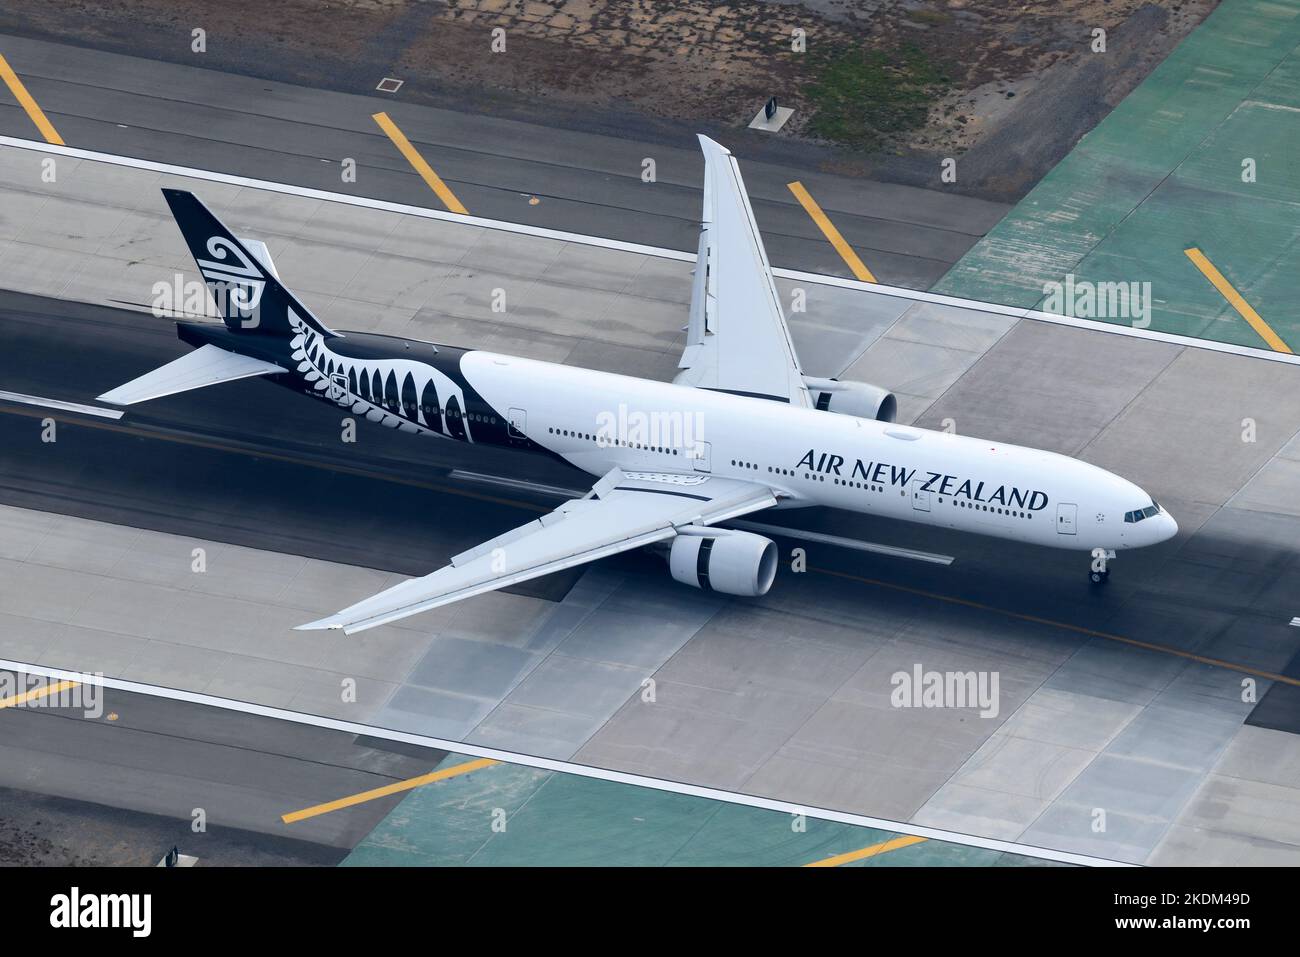 Air New Zealand Boeing 777 aircraft landing at airport. Airplane 77W registered as ZK-OKP. Plane of airline also know as Air NZ. Stock Photo